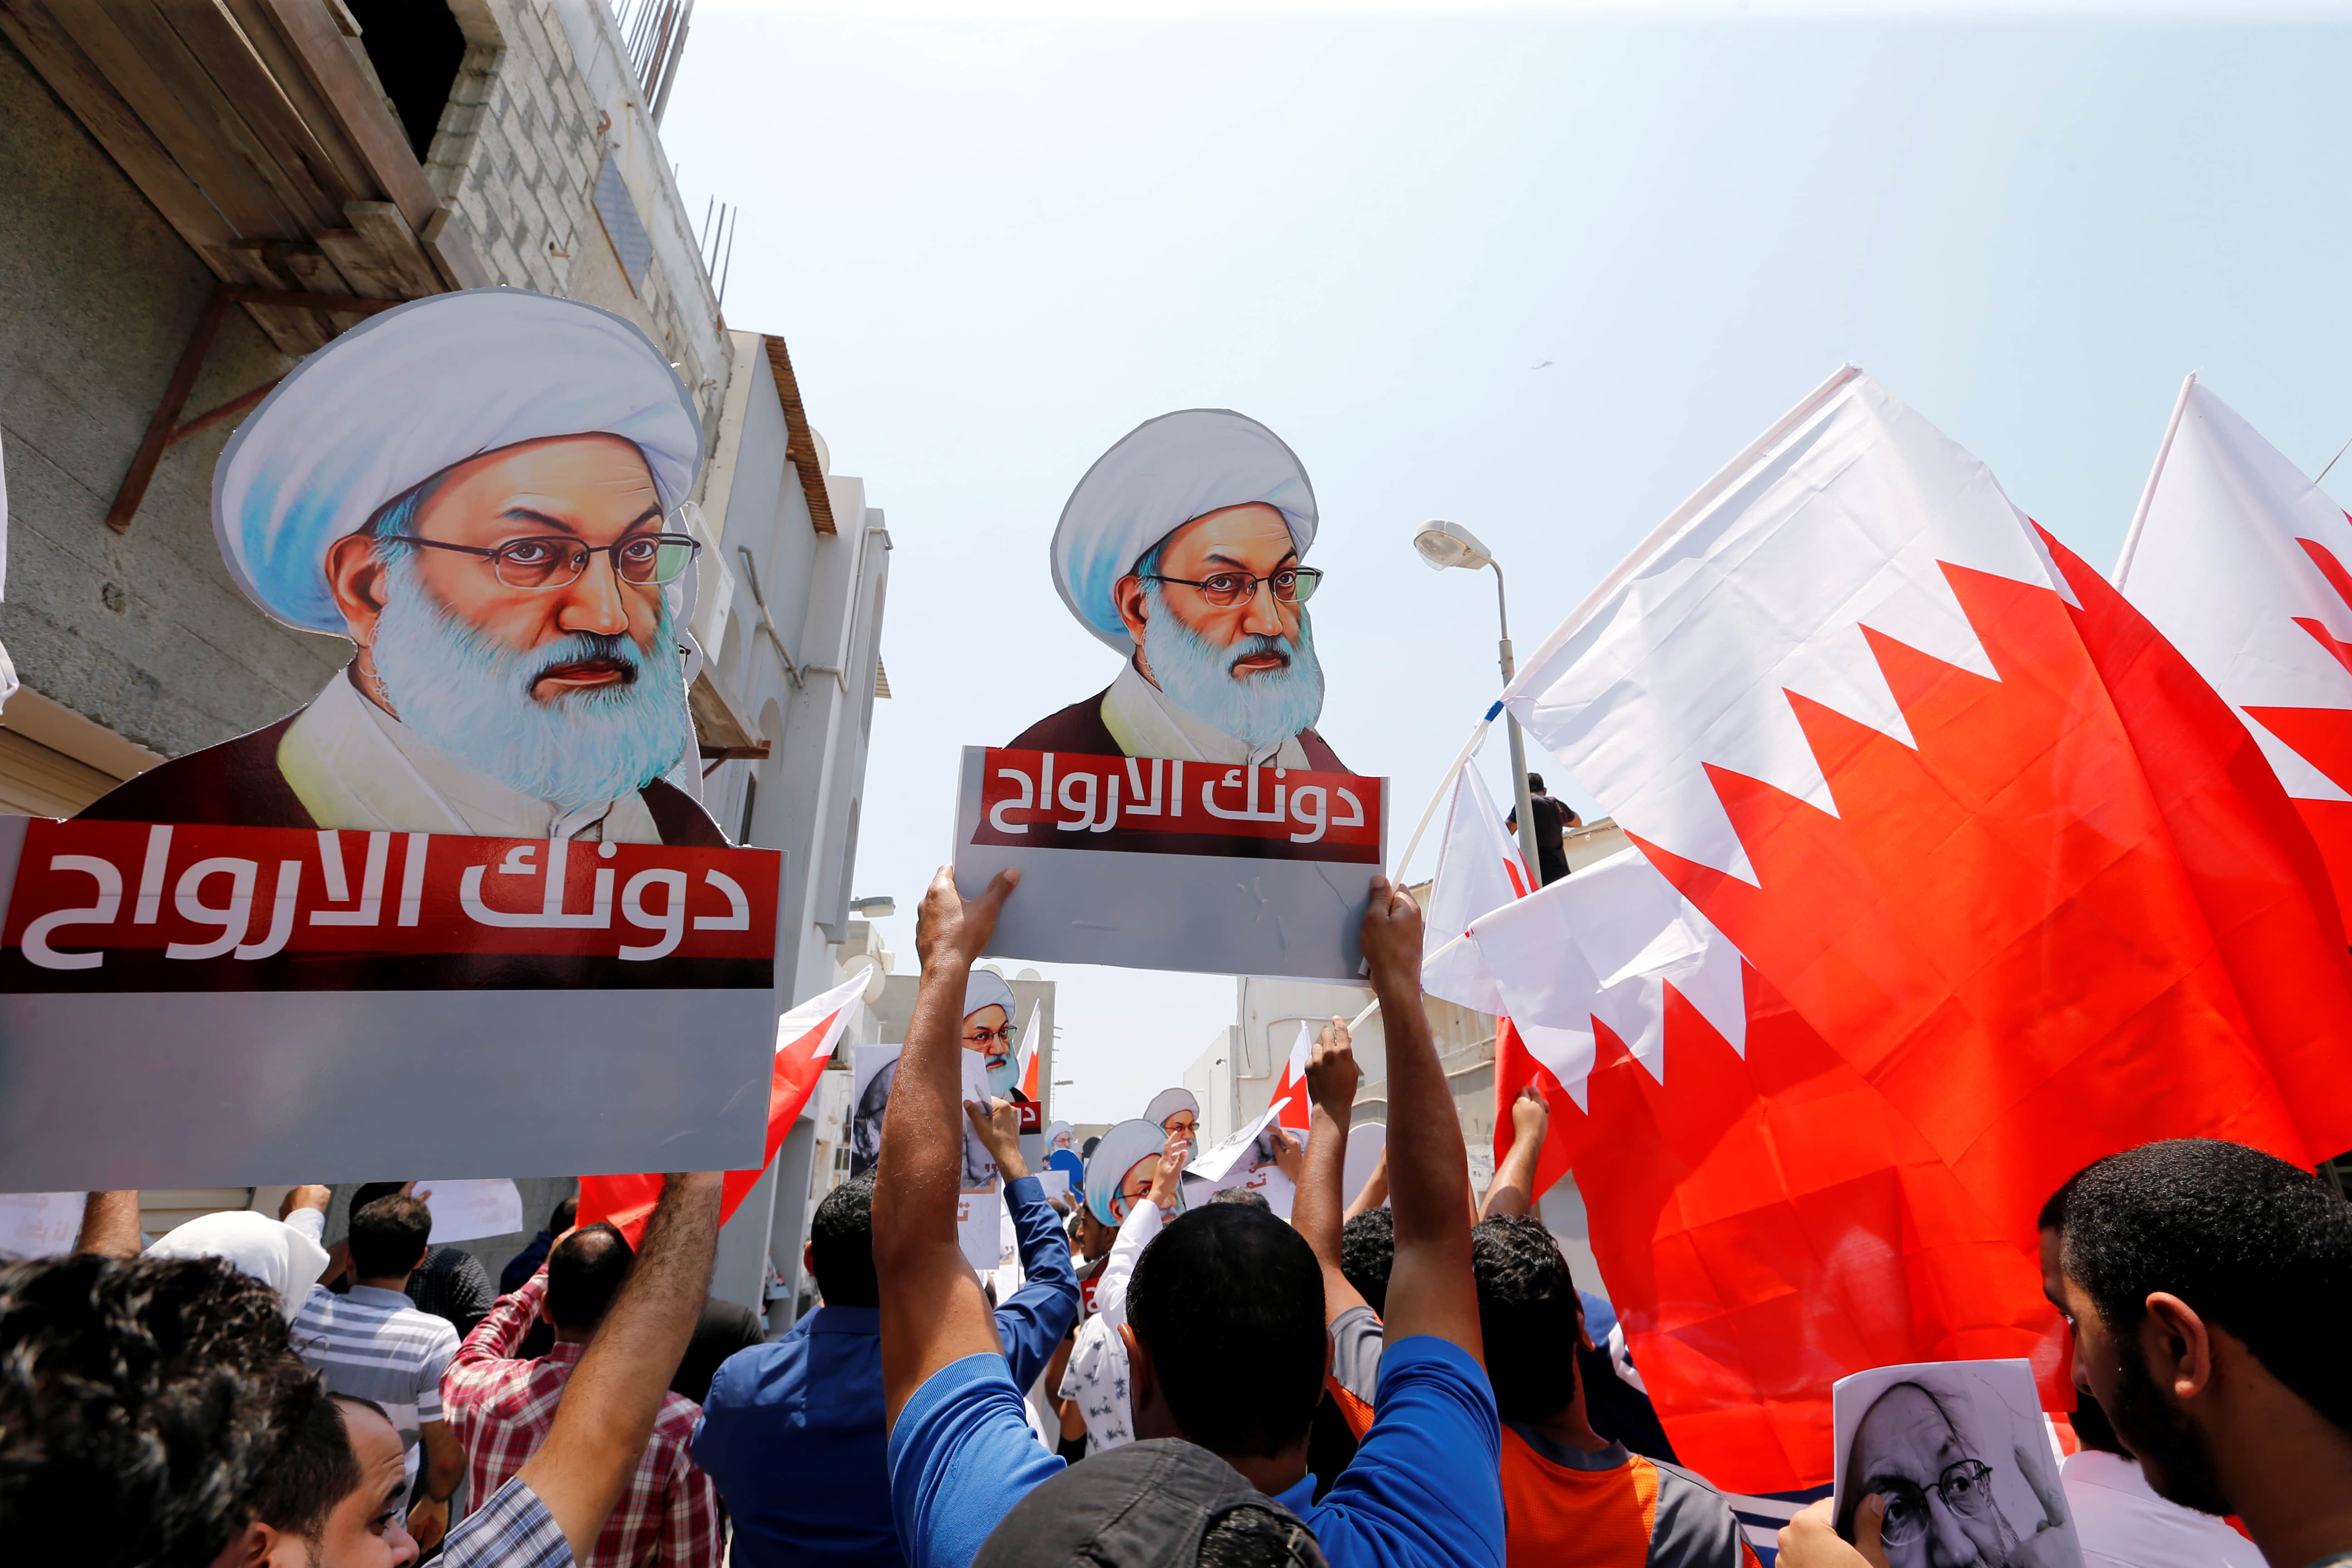 Protesters holding Bahraini flags and placards with images of Bahrain's leading Shi'ite cleric Isa Qassim, shout religious slogans during an anti-government protest after Friday prayers in the village of Diraz, west of Manama, Bahrain, August 12, 2016. The placards read, "We sacrifice our souls for you". , REUTERS/Hamad I Mohammed